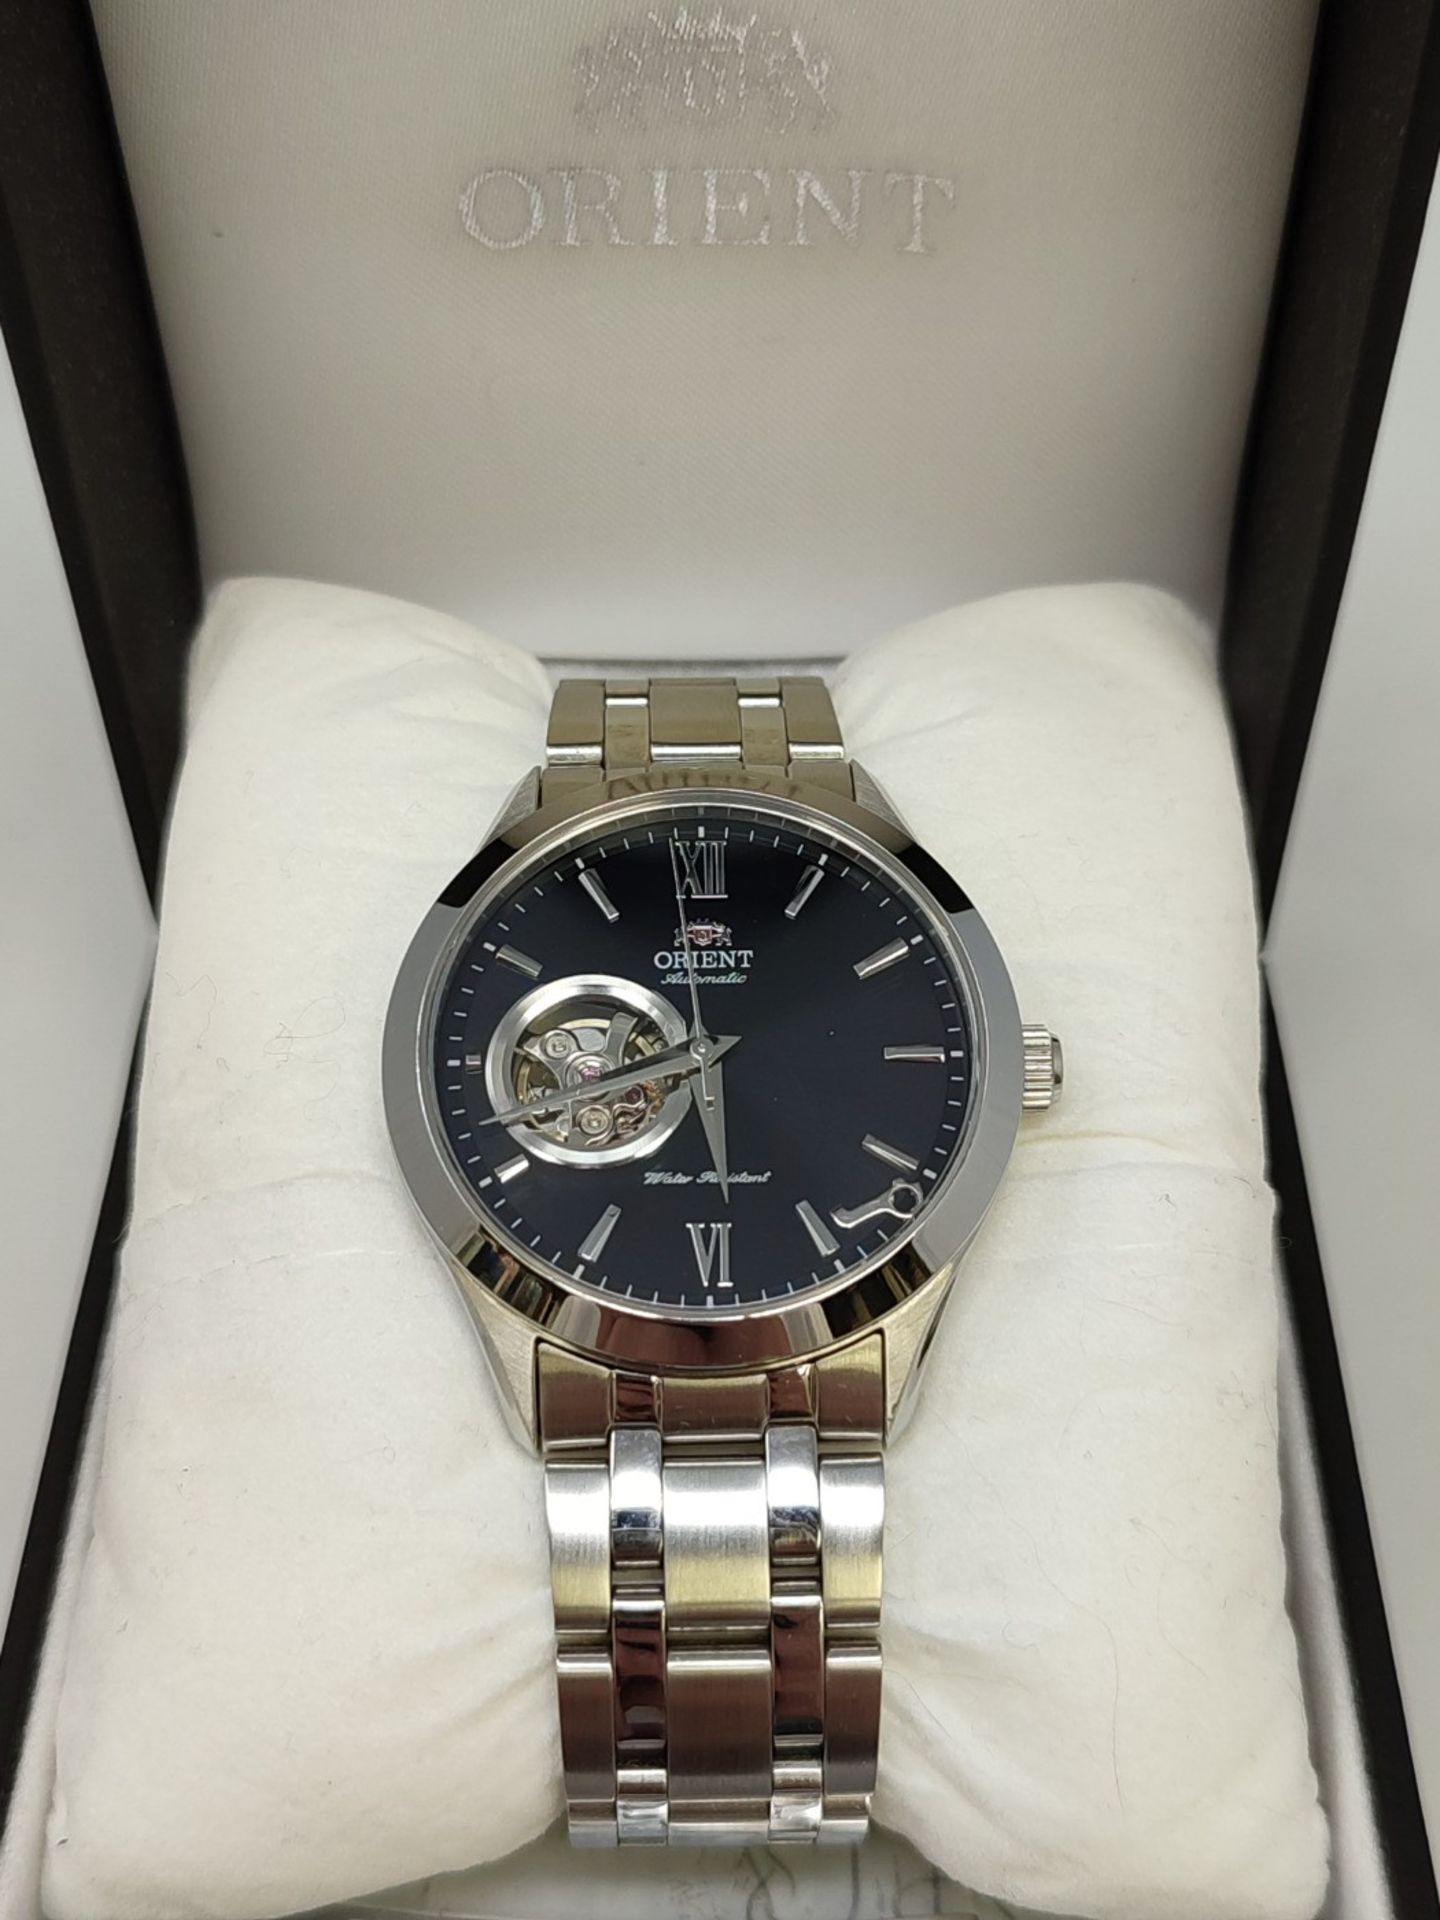 RRP £208.00 ORIENT Men's Analog Automatic Watch with Stainless Steel Bracelet FAG03001B0. - Image 2 of 3